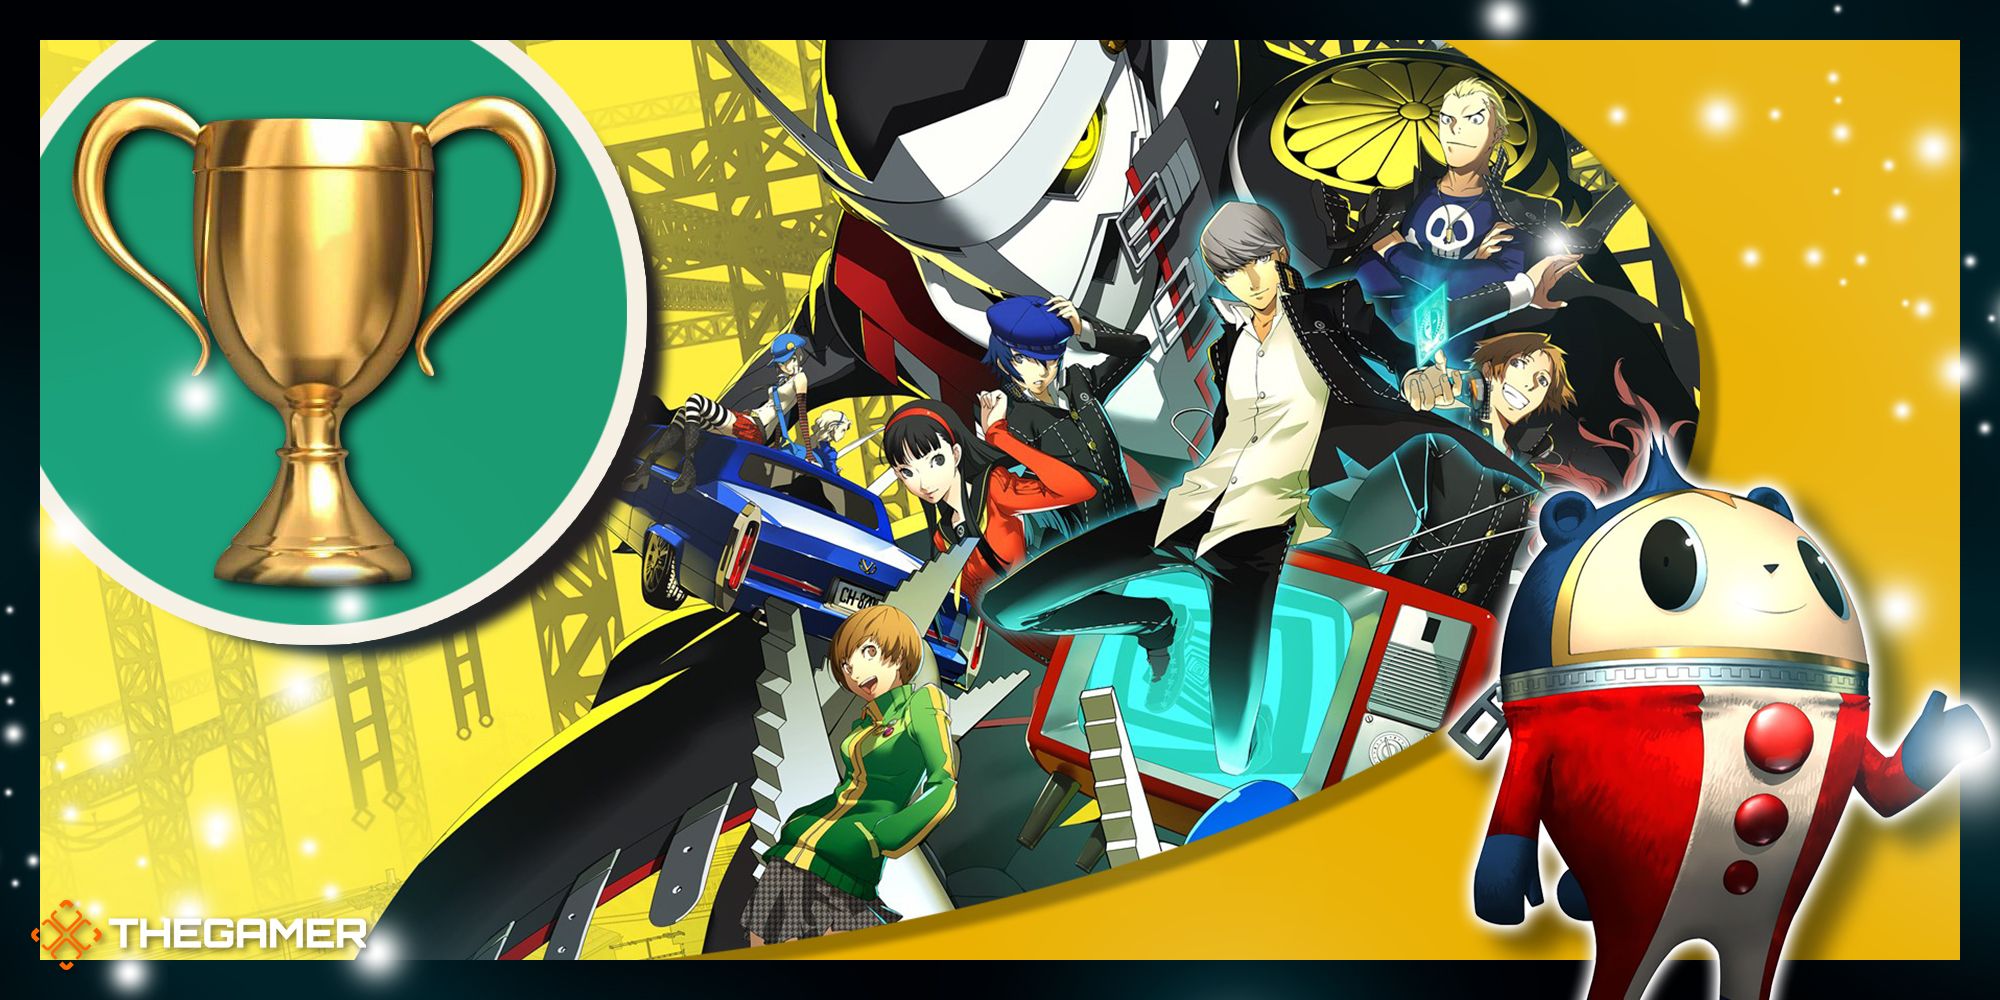 Persona 4 Golden promotional image of key artwork depicting the main characters, a Teddie overlay in the corner, and a trophy on the right.